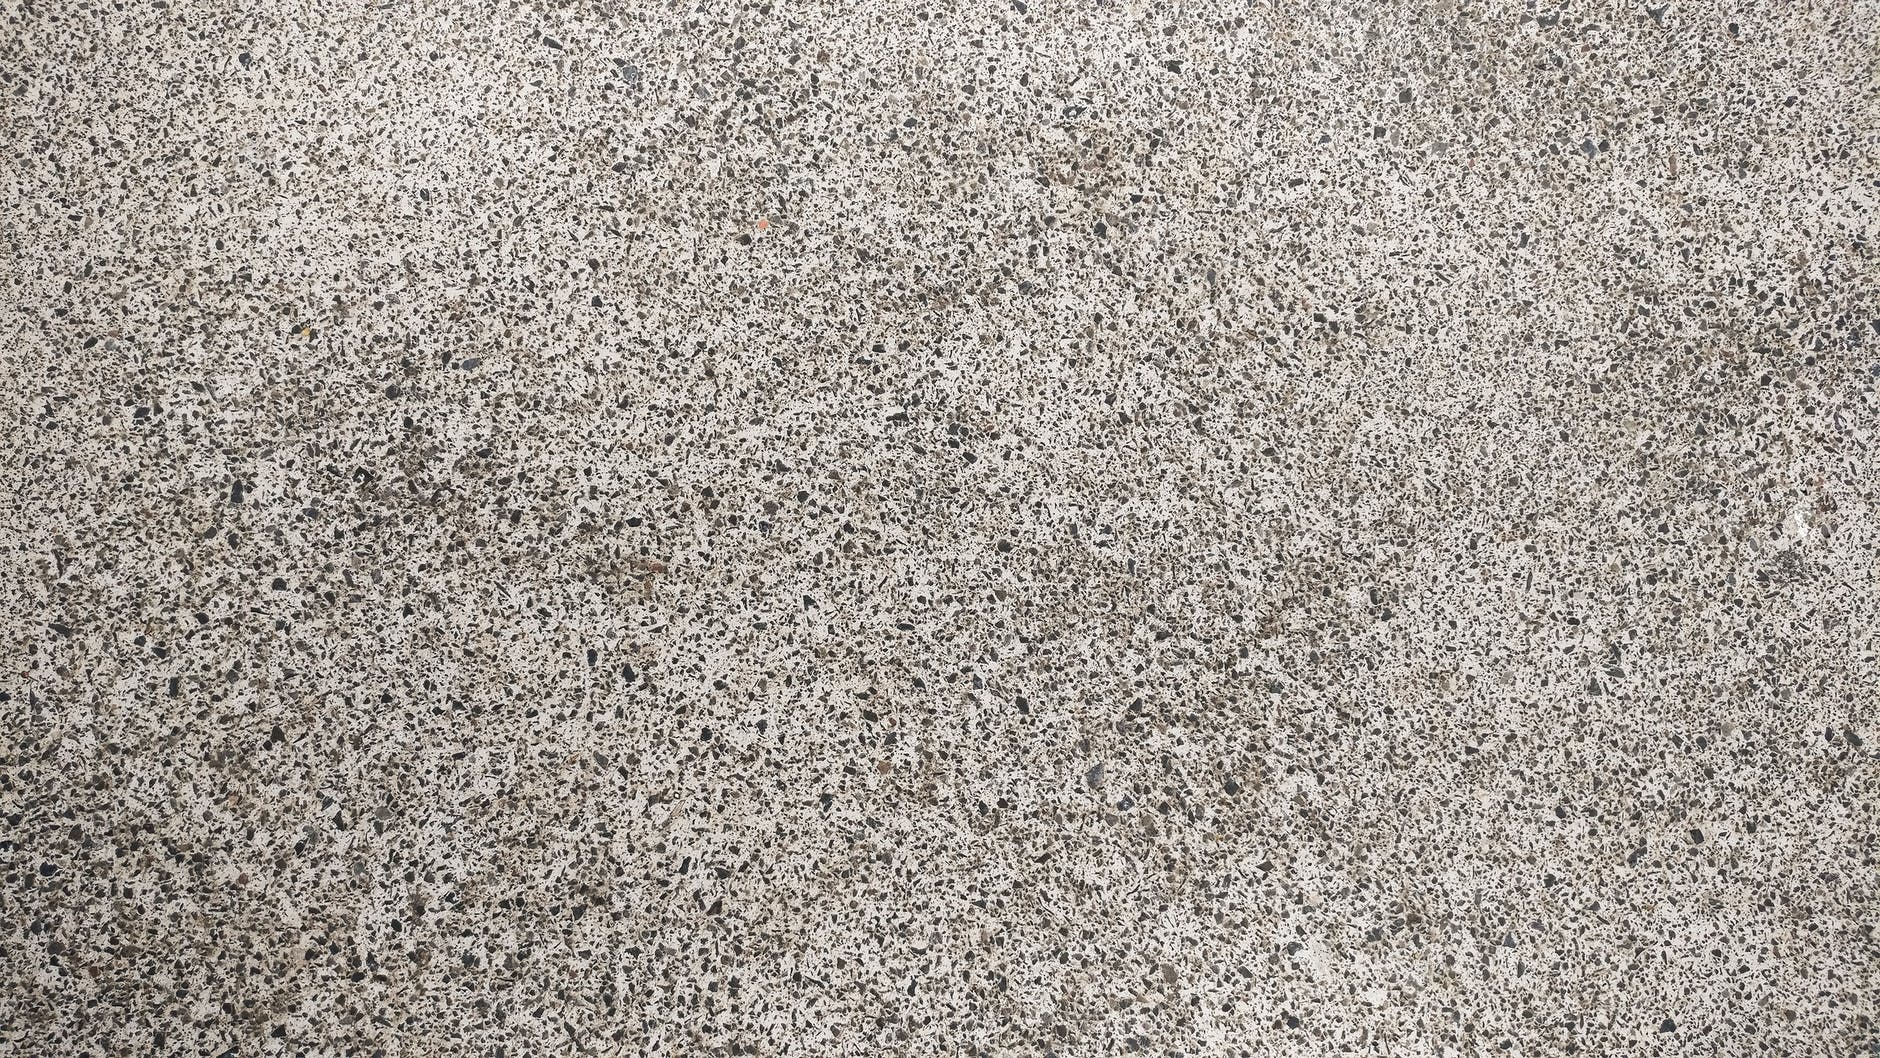 What are The Mains Properties of Concrete